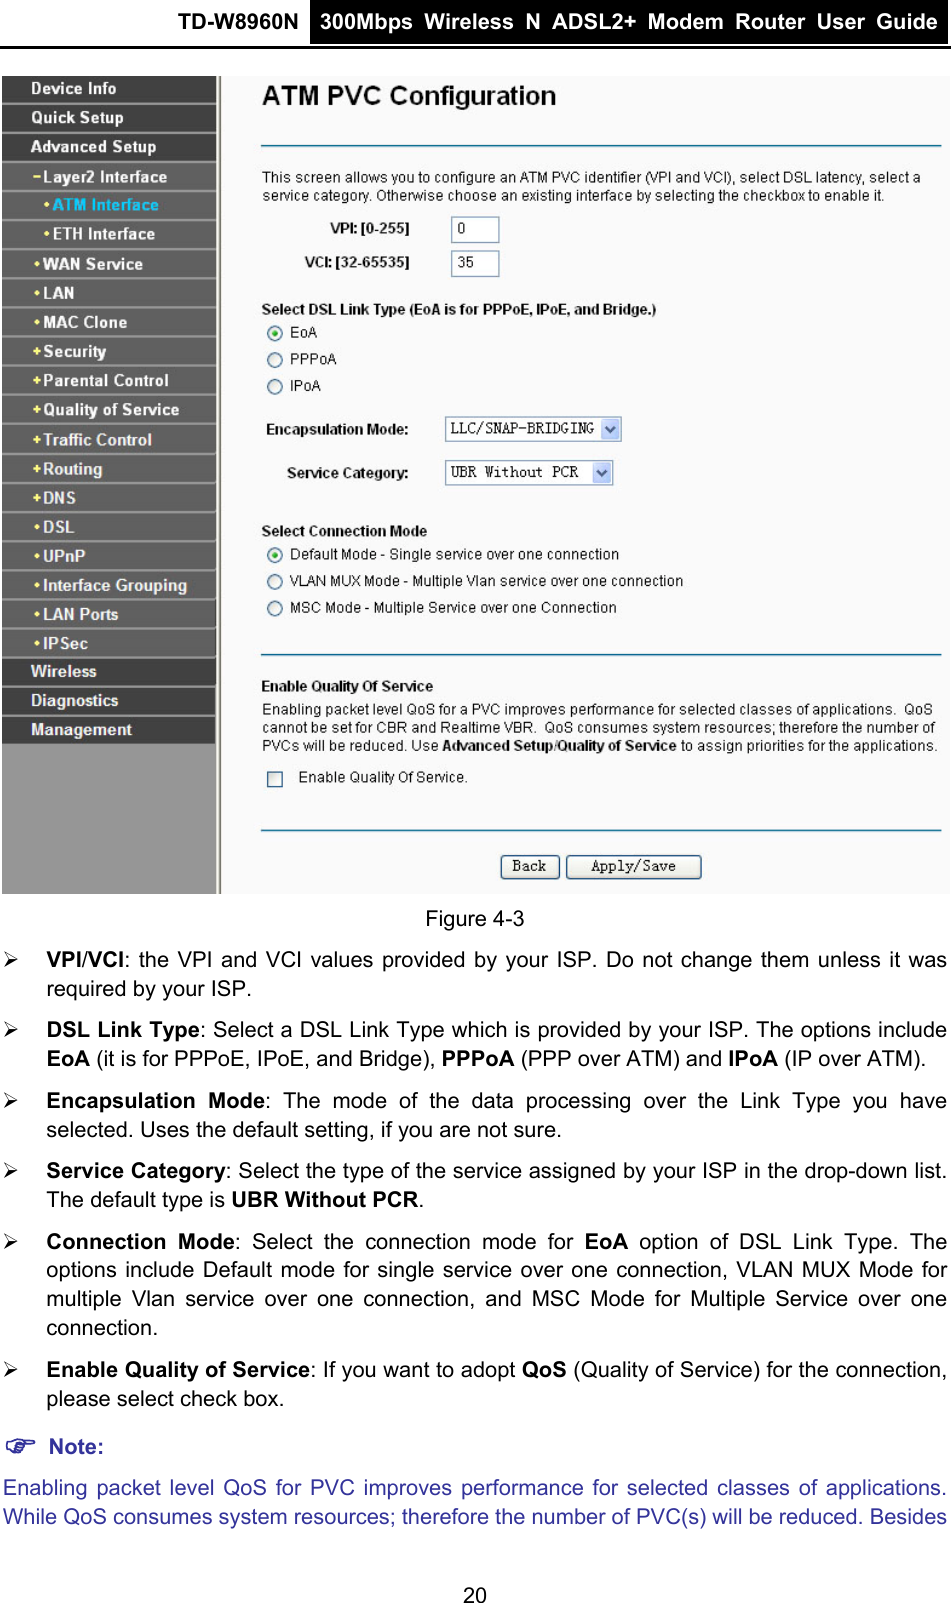 TD-W8960N  300Mbps Wireless N ADSL2+ Modem Router User Guide   Figure 4-3 ¾ VPI/VCI: the VPI and VCI values provided by your ISP. Do not change them unless it was required by your ISP. ¾ DSL Link Type: Select a DSL Link Type which is provided by your ISP. The options include EoA (it is for PPPoE, IPoE, and Bridge), PPPoA (PPP over ATM) and IPoA (IP over ATM). ¾ Encapsulation Mode: The mode of the data processing over the Link Type you have selected. Uses the default setting, if you are not sure. ¾ Service Category: Select the type of the service assigned by your ISP in the drop-down list. The default type is UBR Without PCR. ¾ Connection Mode: Select the connection mode for EoA option of DSL Link Type. The options include Default mode for single service over one connection, VLAN MUX Mode for multiple Vlan service over one connection, and MSC Mode for Multiple Service over one connection.   ¾ Enable Quality of Service: If you want to adopt QoS (Quality of Service) for the connection, please select check box. ) Note: Enabling packet level QoS for PVC improves performance for selected classes of applications. While QoS consumes system resources; therefore the number of PVC(s) will be reduced. Besides 20 